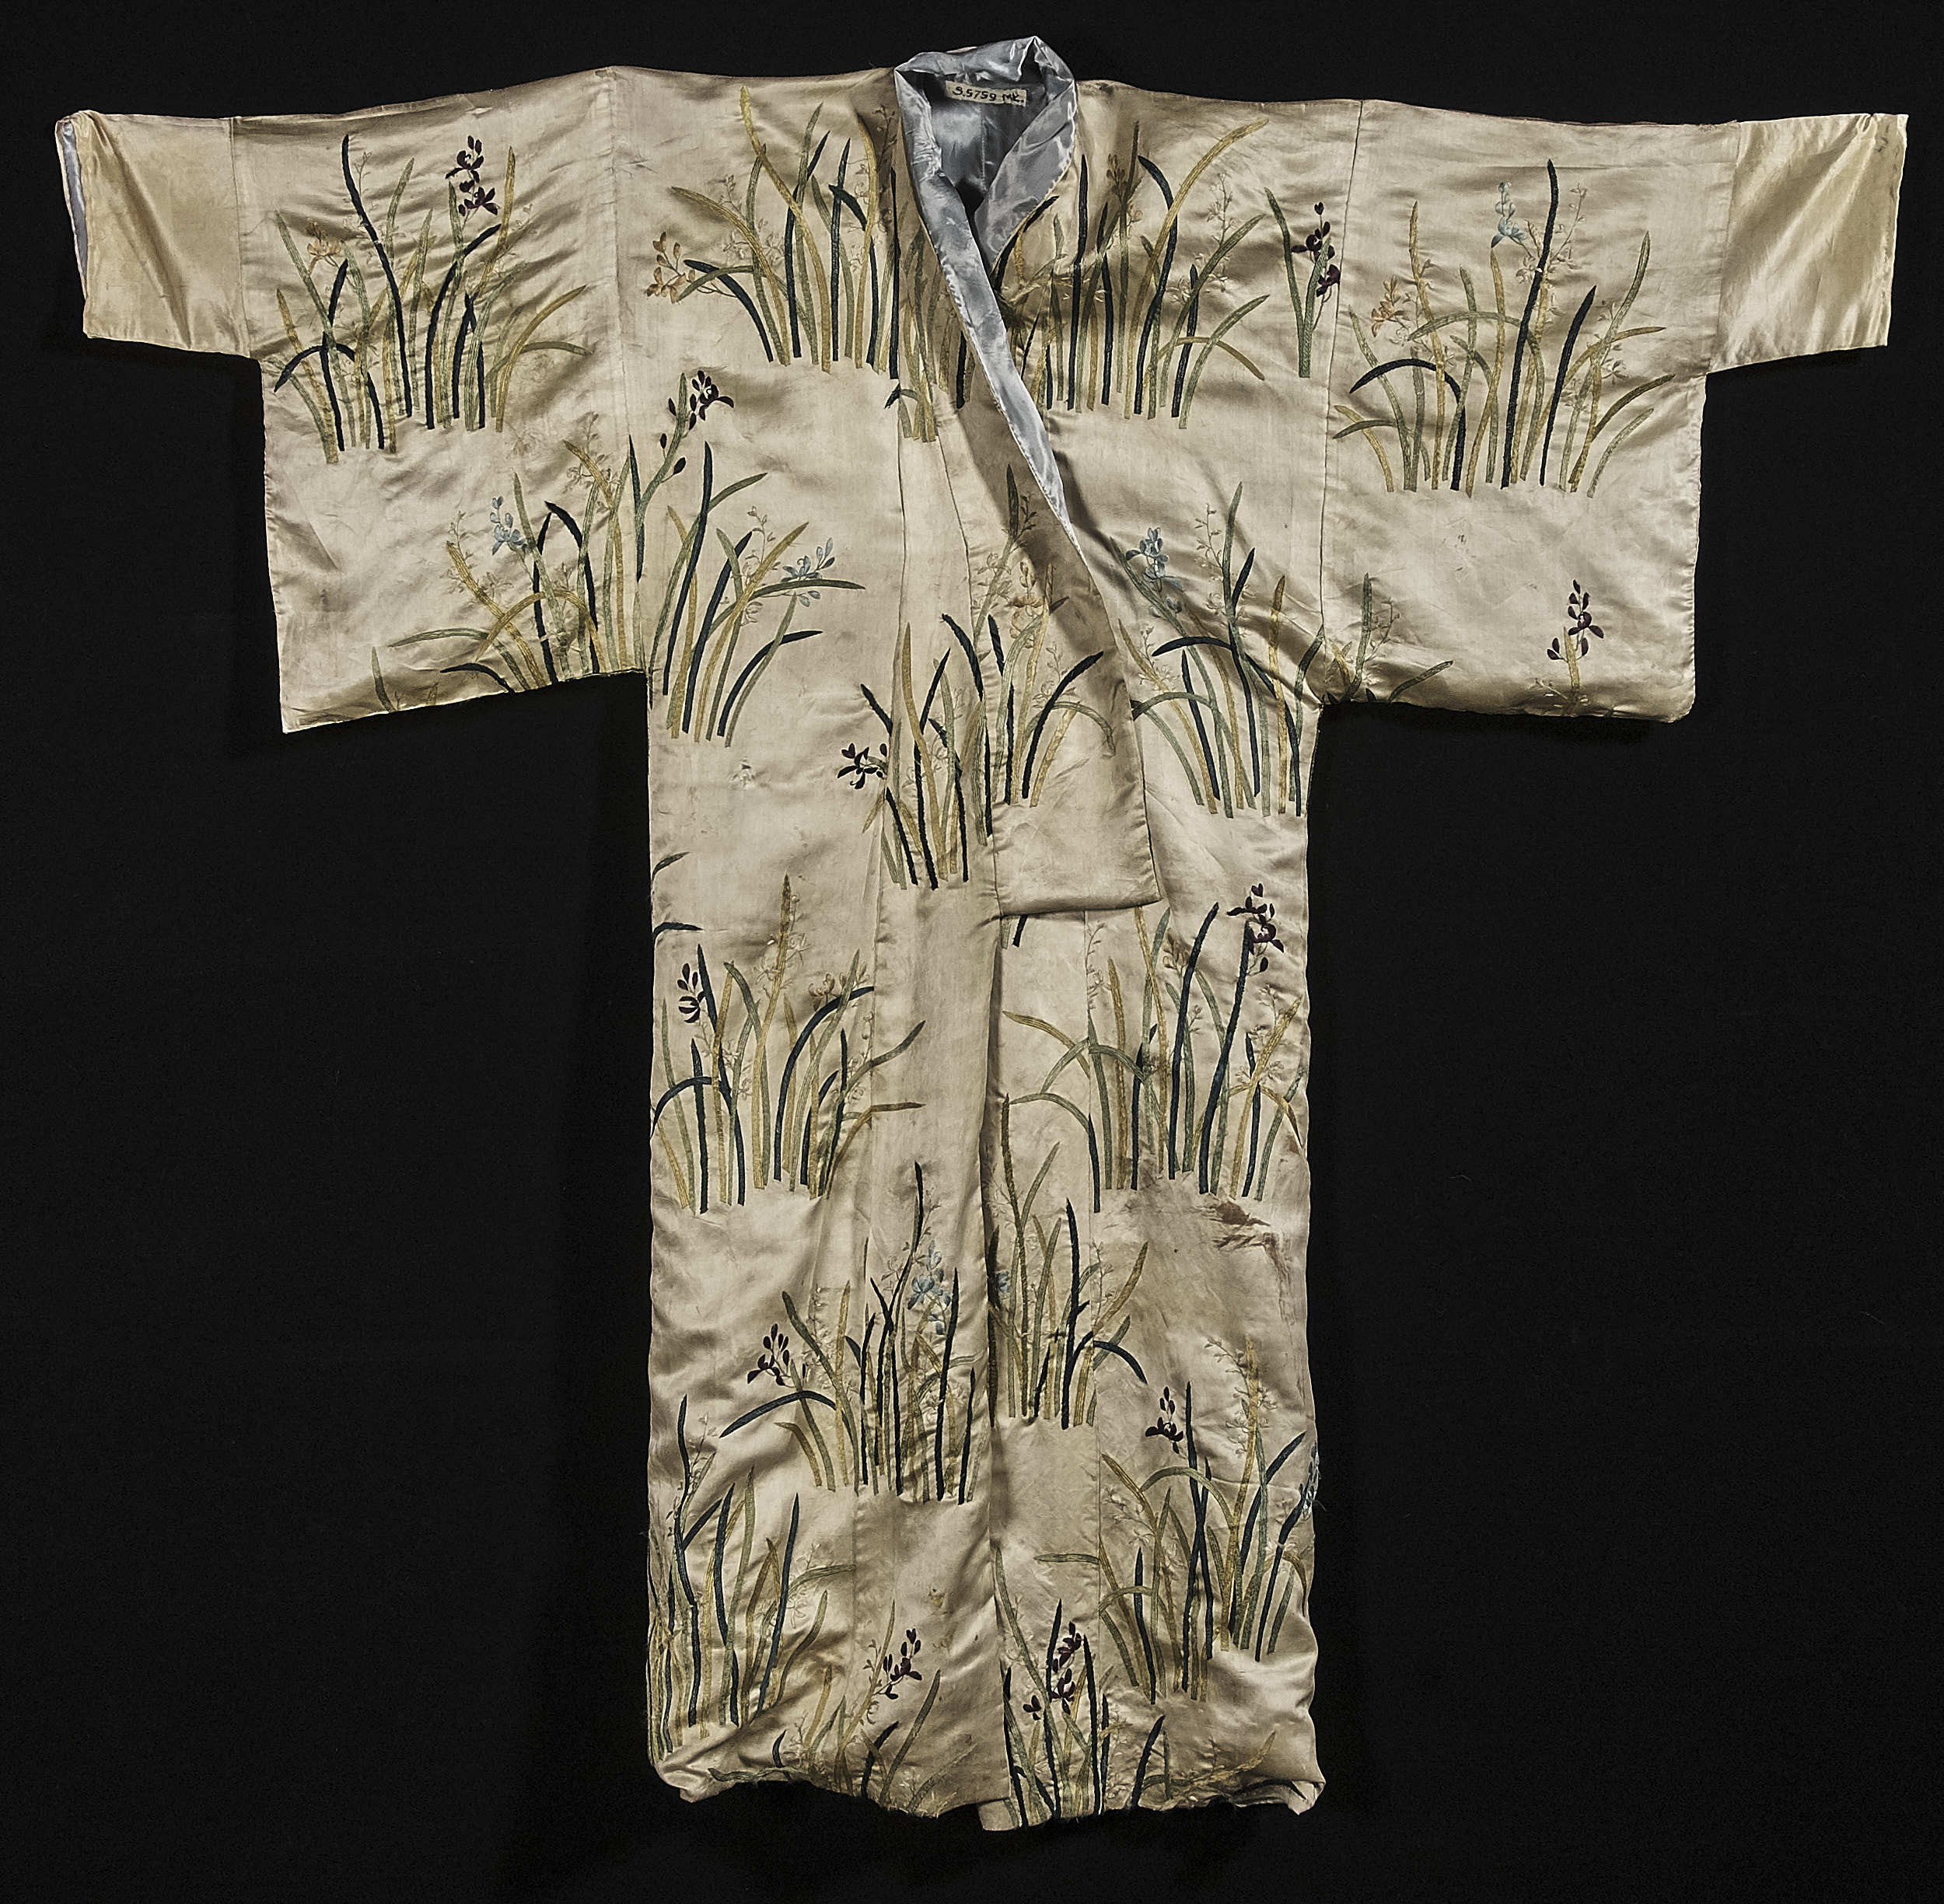 Kimono S.5759MŁ – In museums